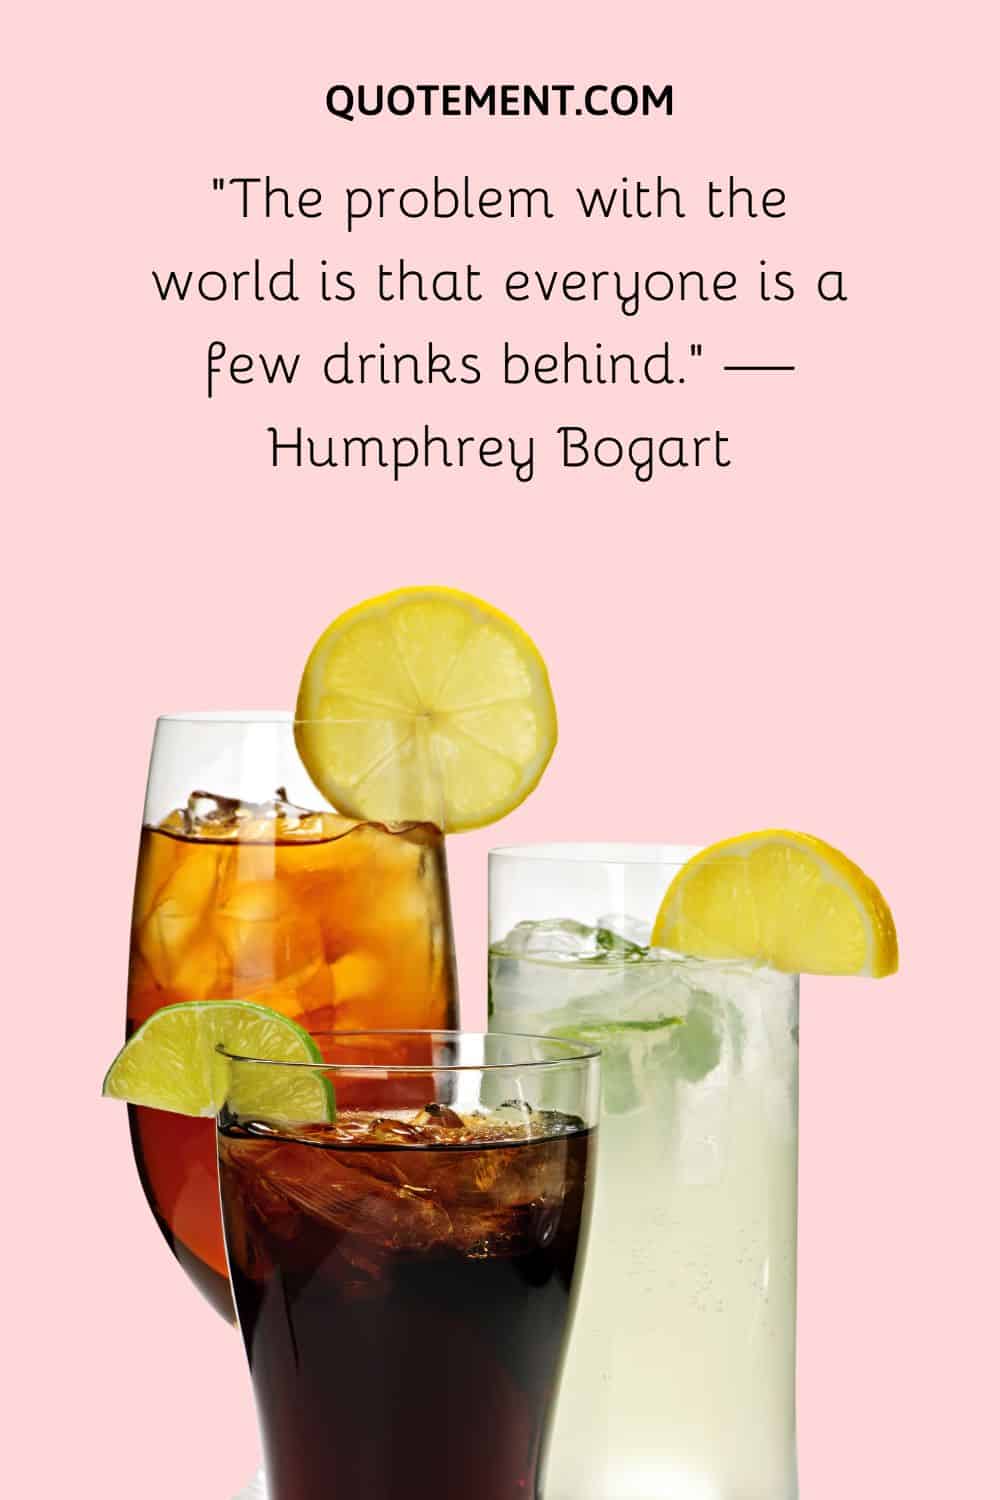 The problem with the world is that everyone is a few drinks behind.